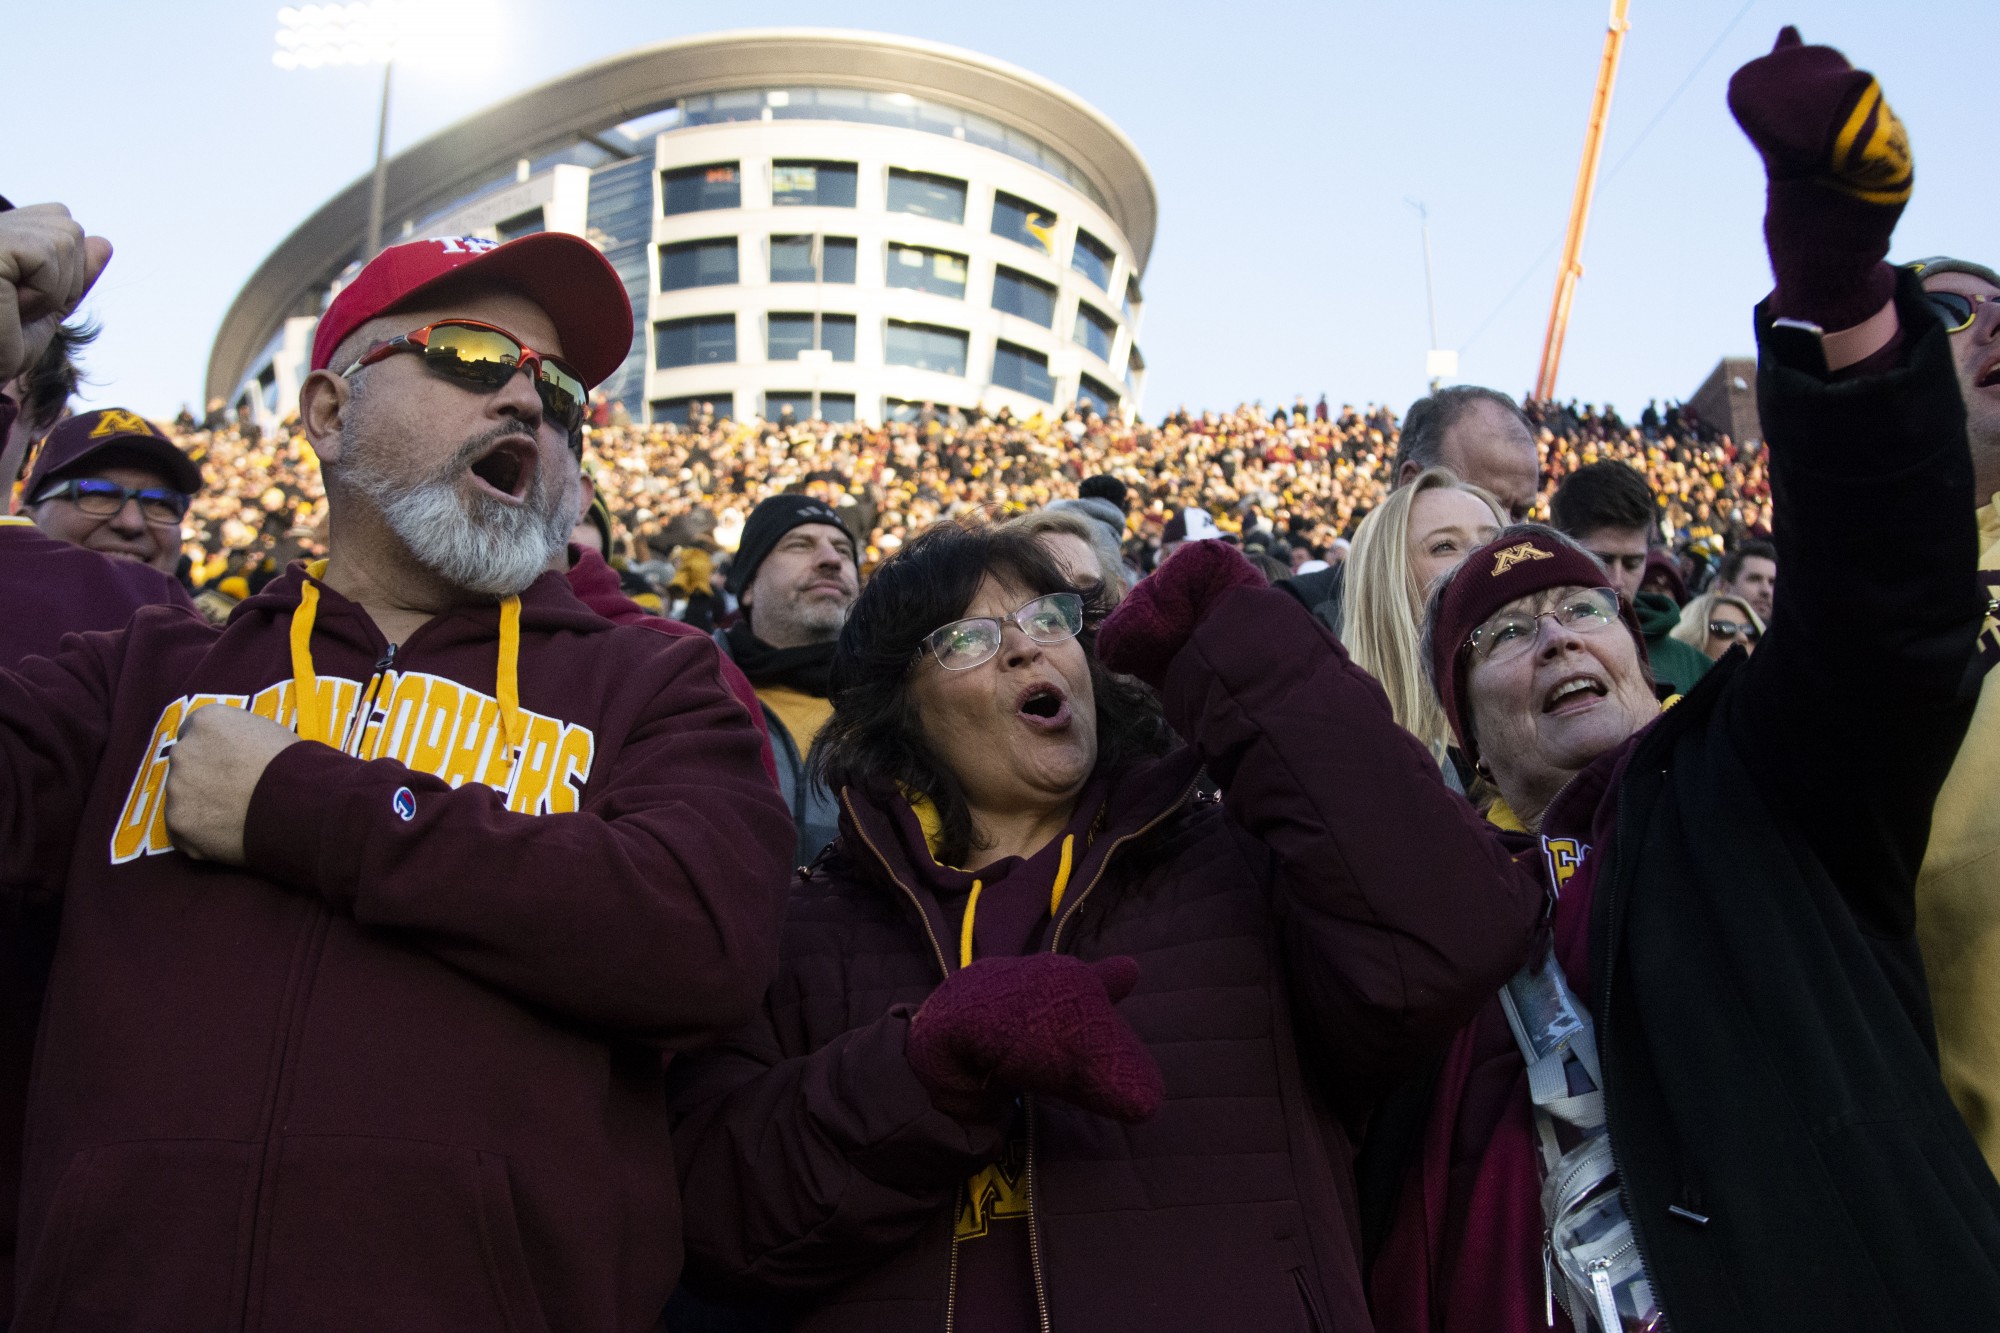 Fans cheer for a first down at Kinnick Stadium on Saturday, Nov. 16. Iowa defeated the Gophers 23-19 ending their winning streak and bringing their record to 9-1. (Parker Johnson / Minnesota Daily)